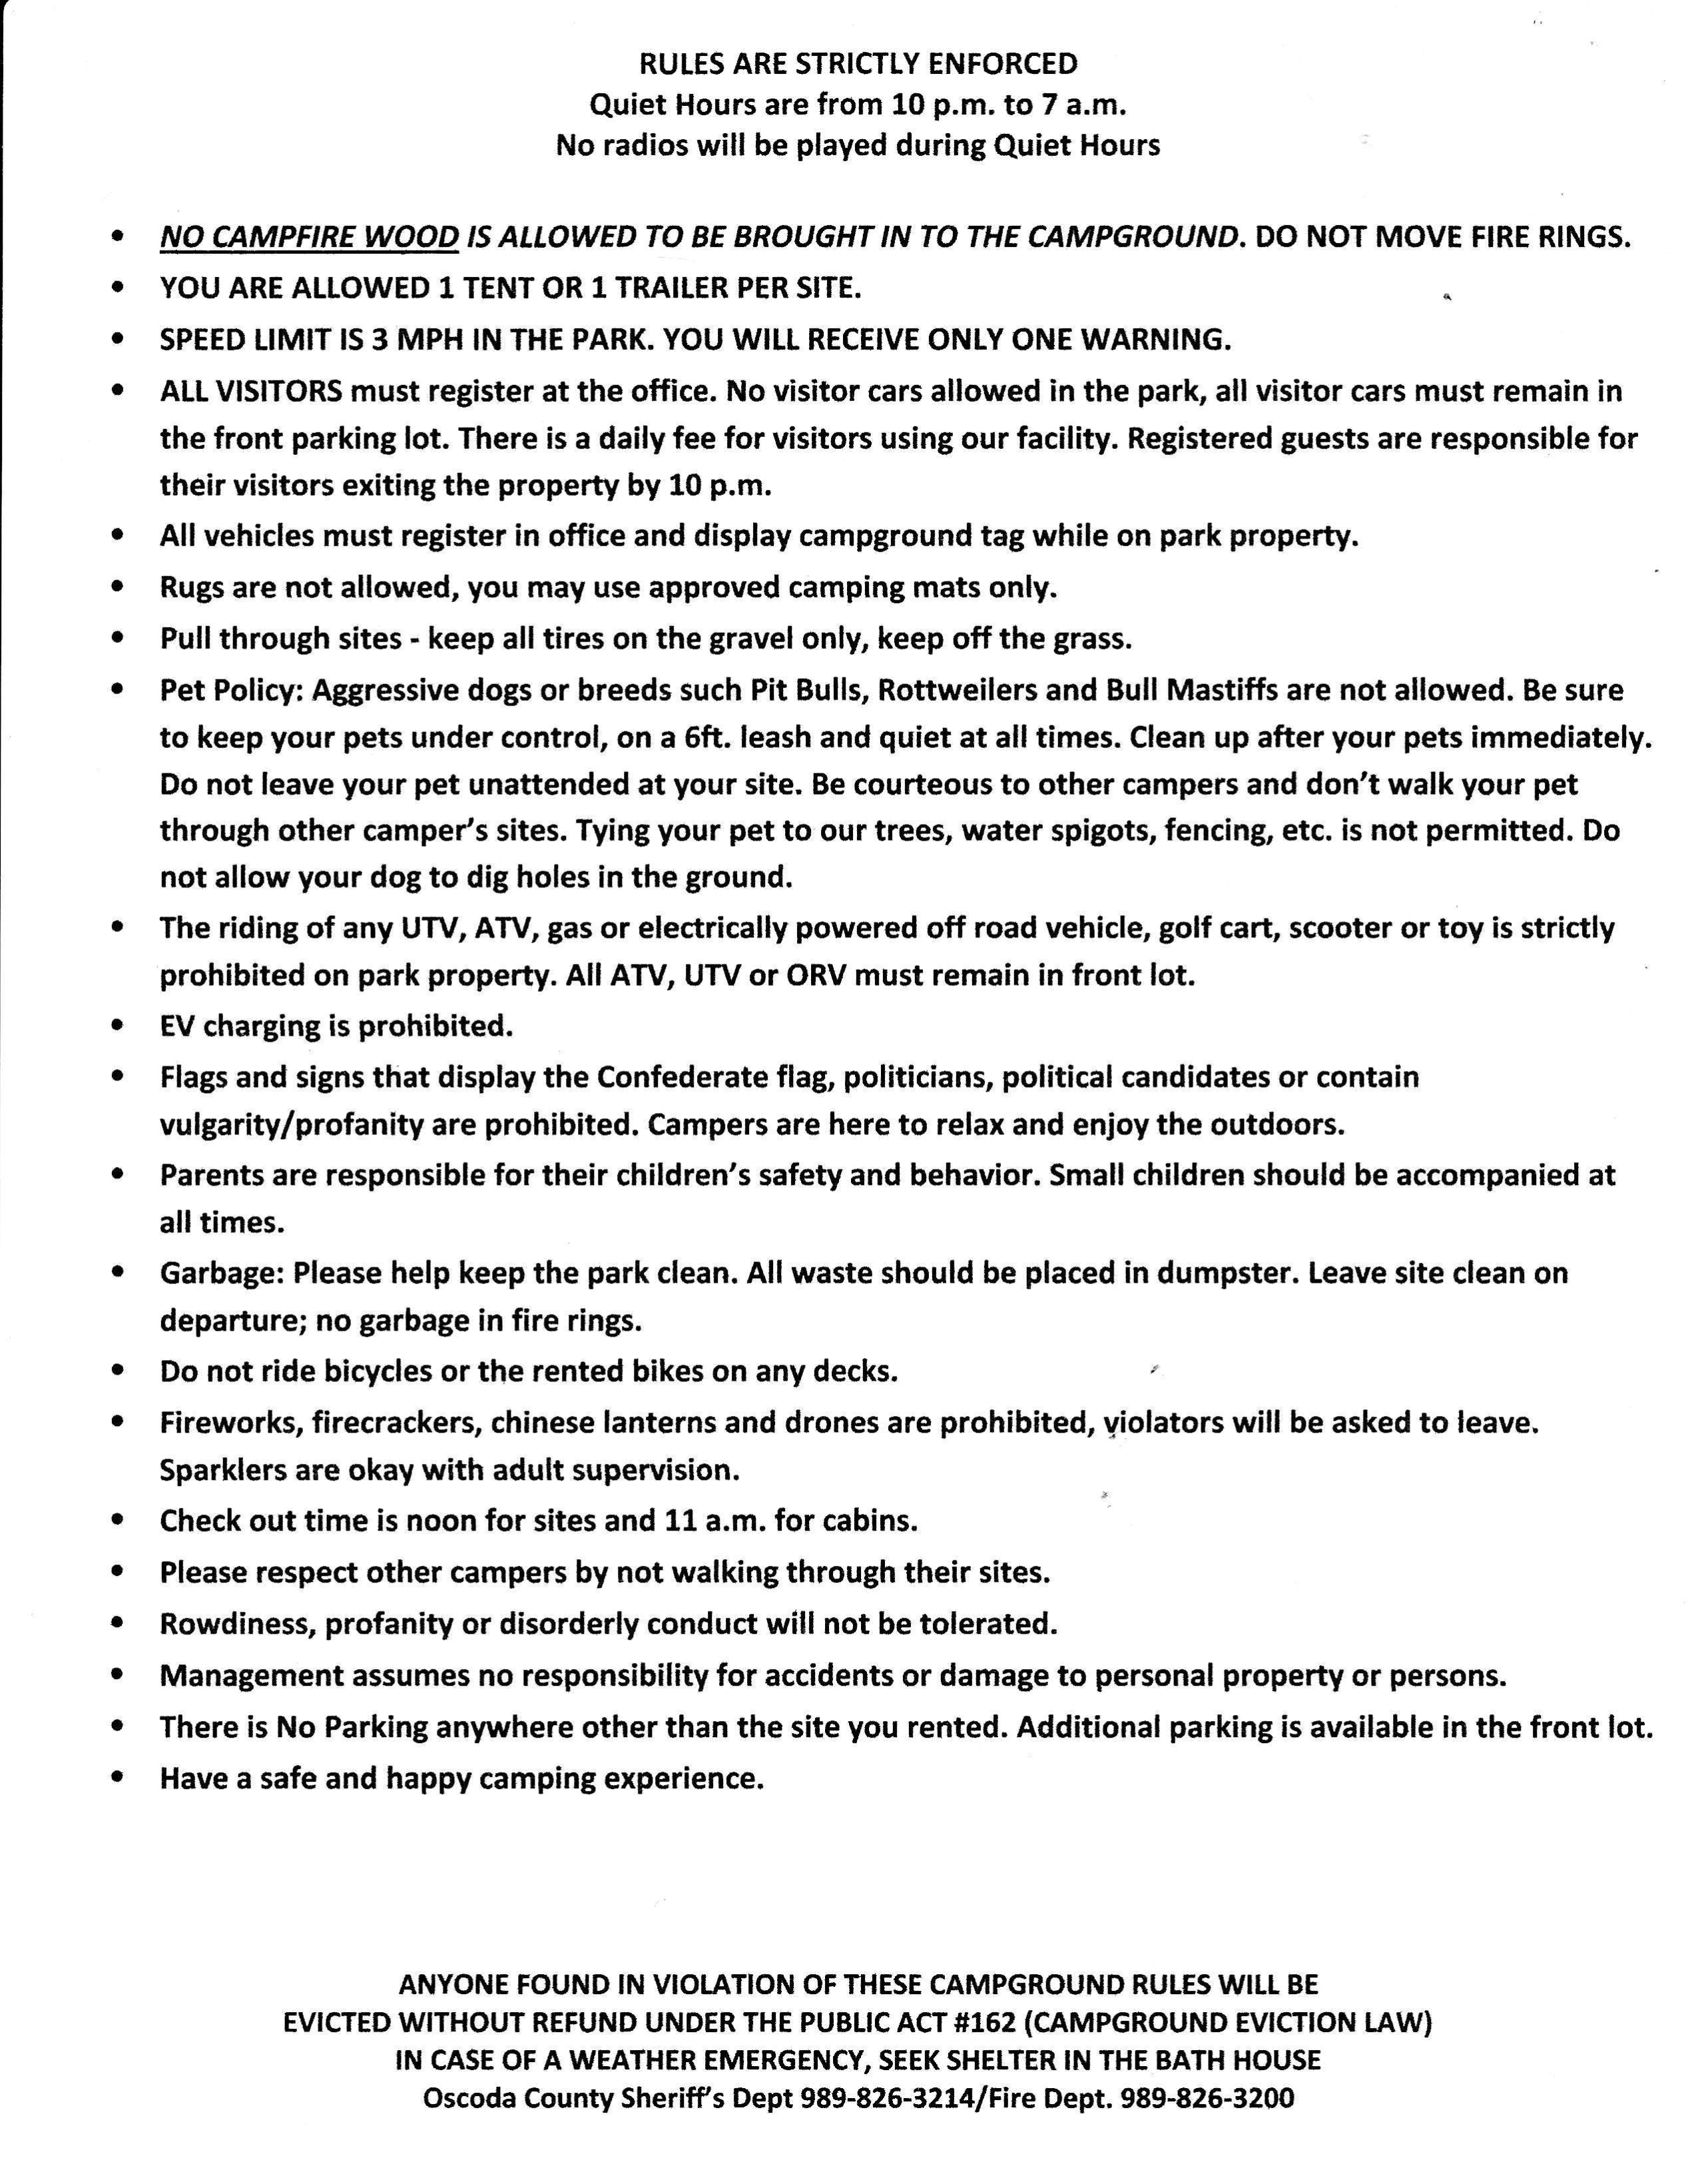 Mio Pines Campground Policies and Rules